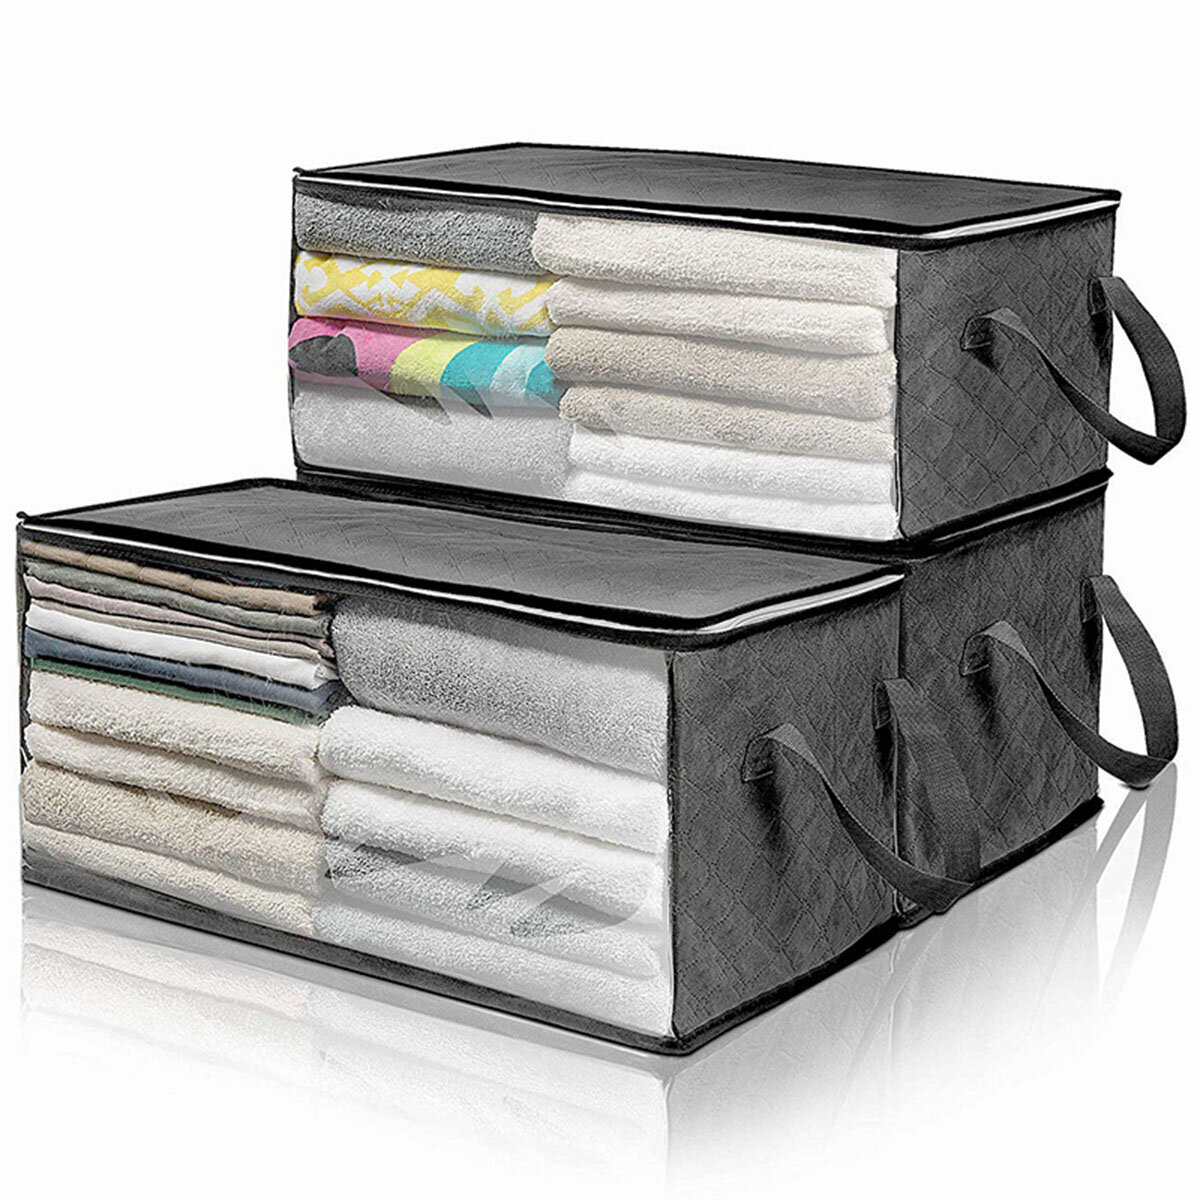 

Portable Easy to Carry Quilt Storage Bag Flat Foldable Space-saving Storage Bag